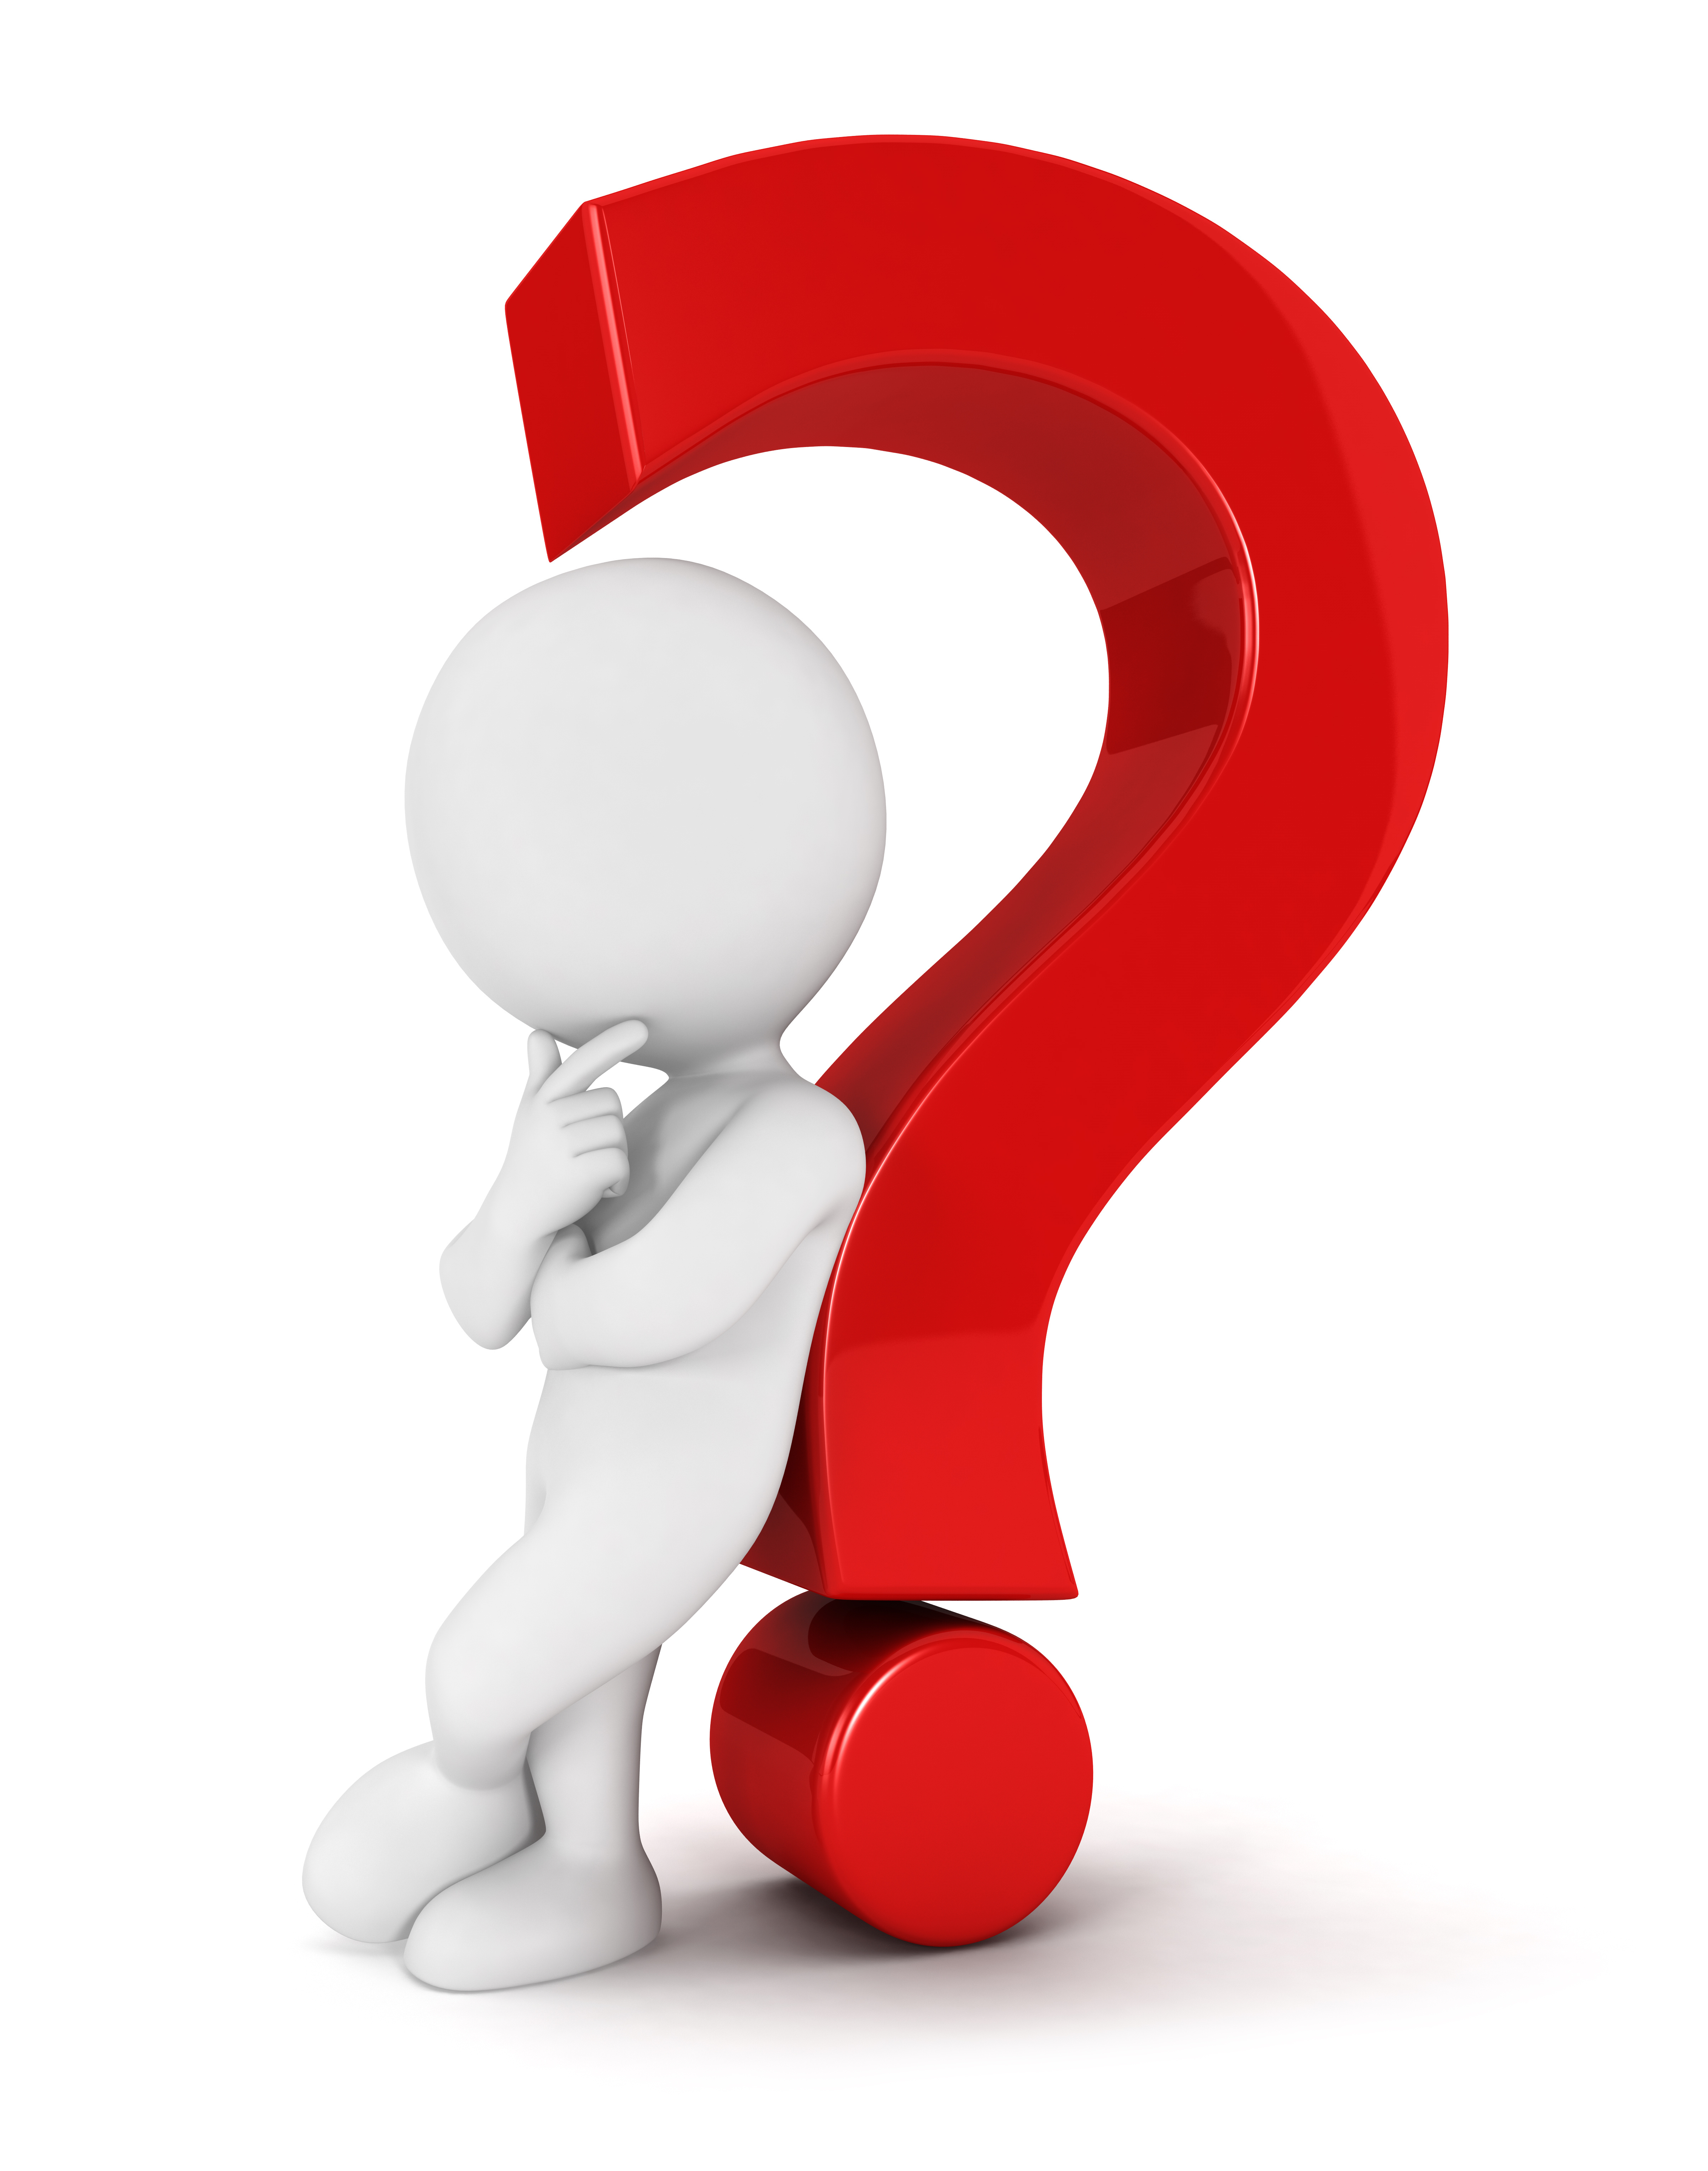 Free Question Mark Images, Download Free Clip Art, Free Clip